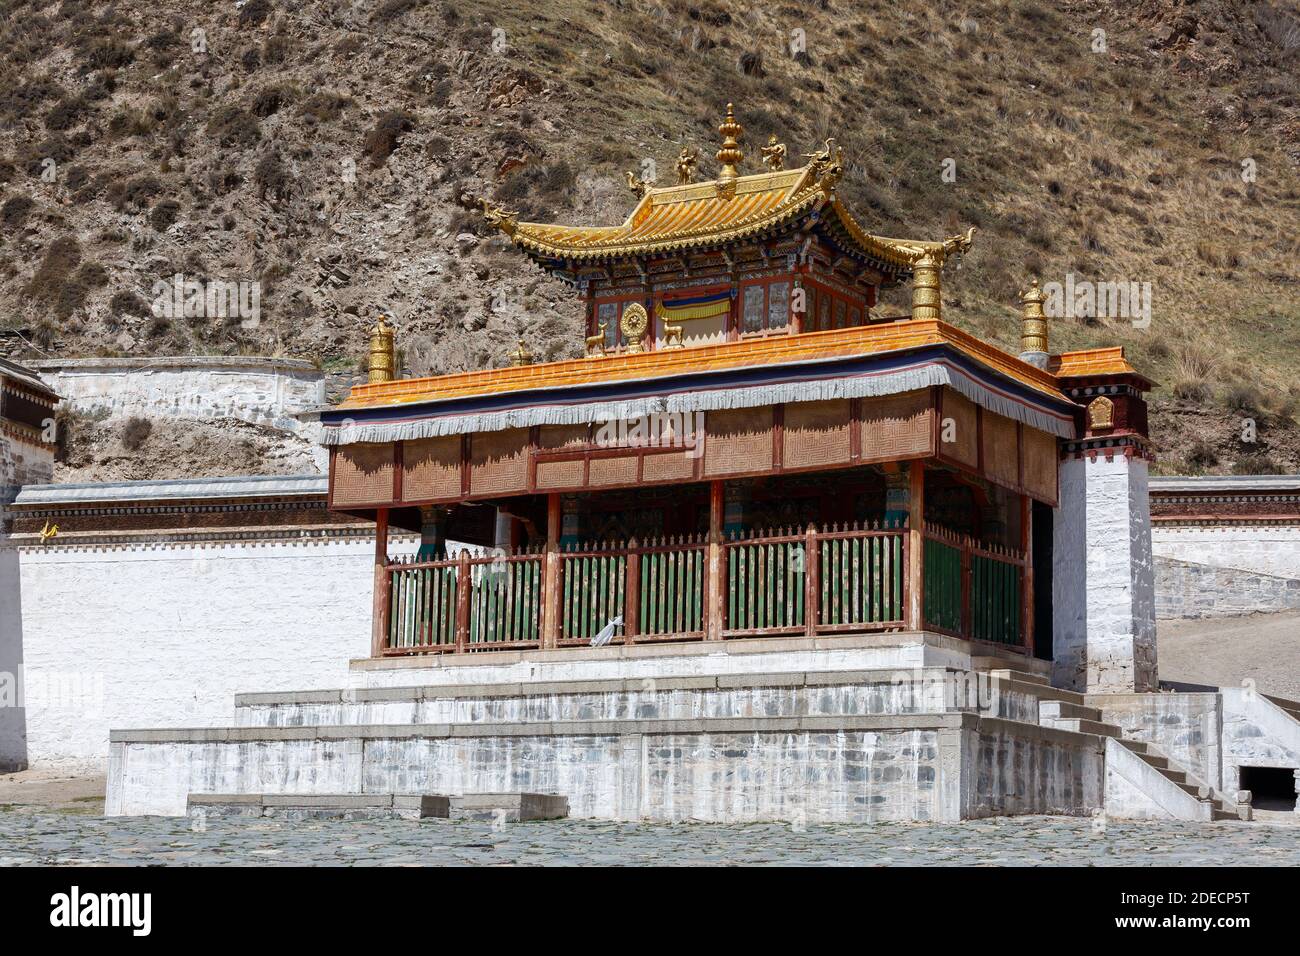 Xiahe, Gansu Province / China - April 28, 2017: Temple building with golden rooftop at Labrang monastery. Largest monastery of tibetan buddhism outsid Stock Photo